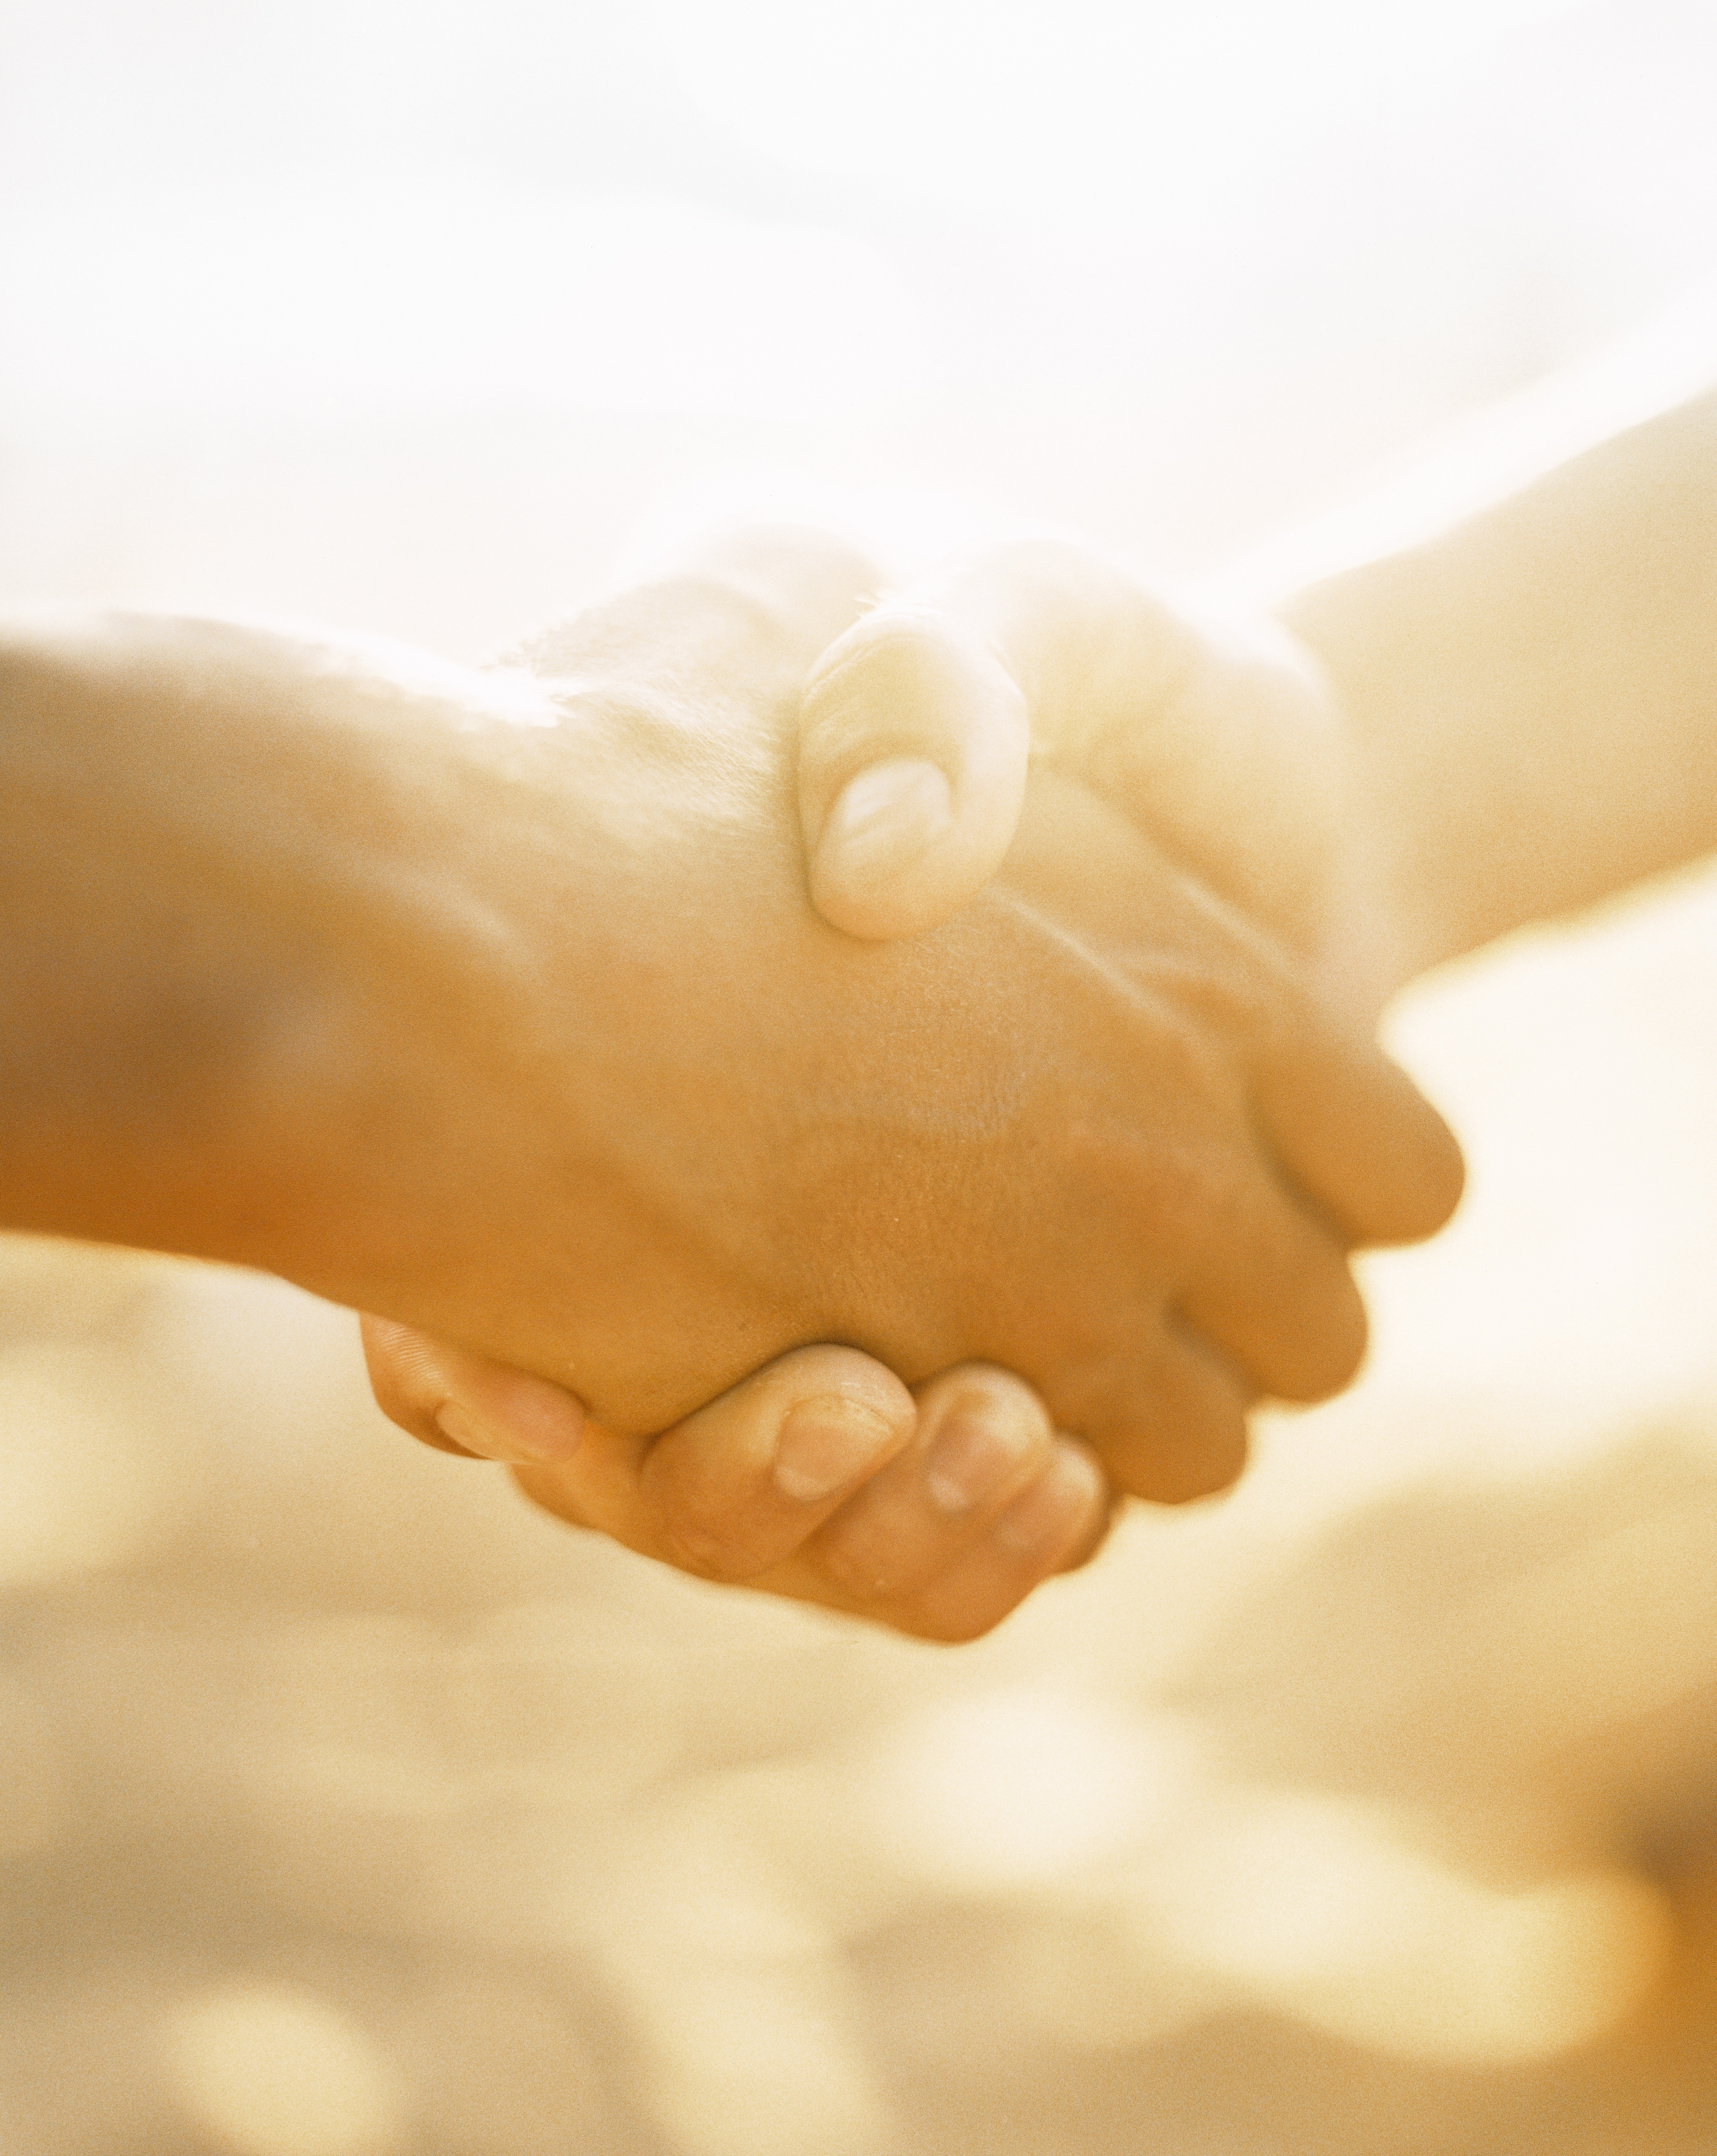 Two persons shaking hands in sunlight, close-up